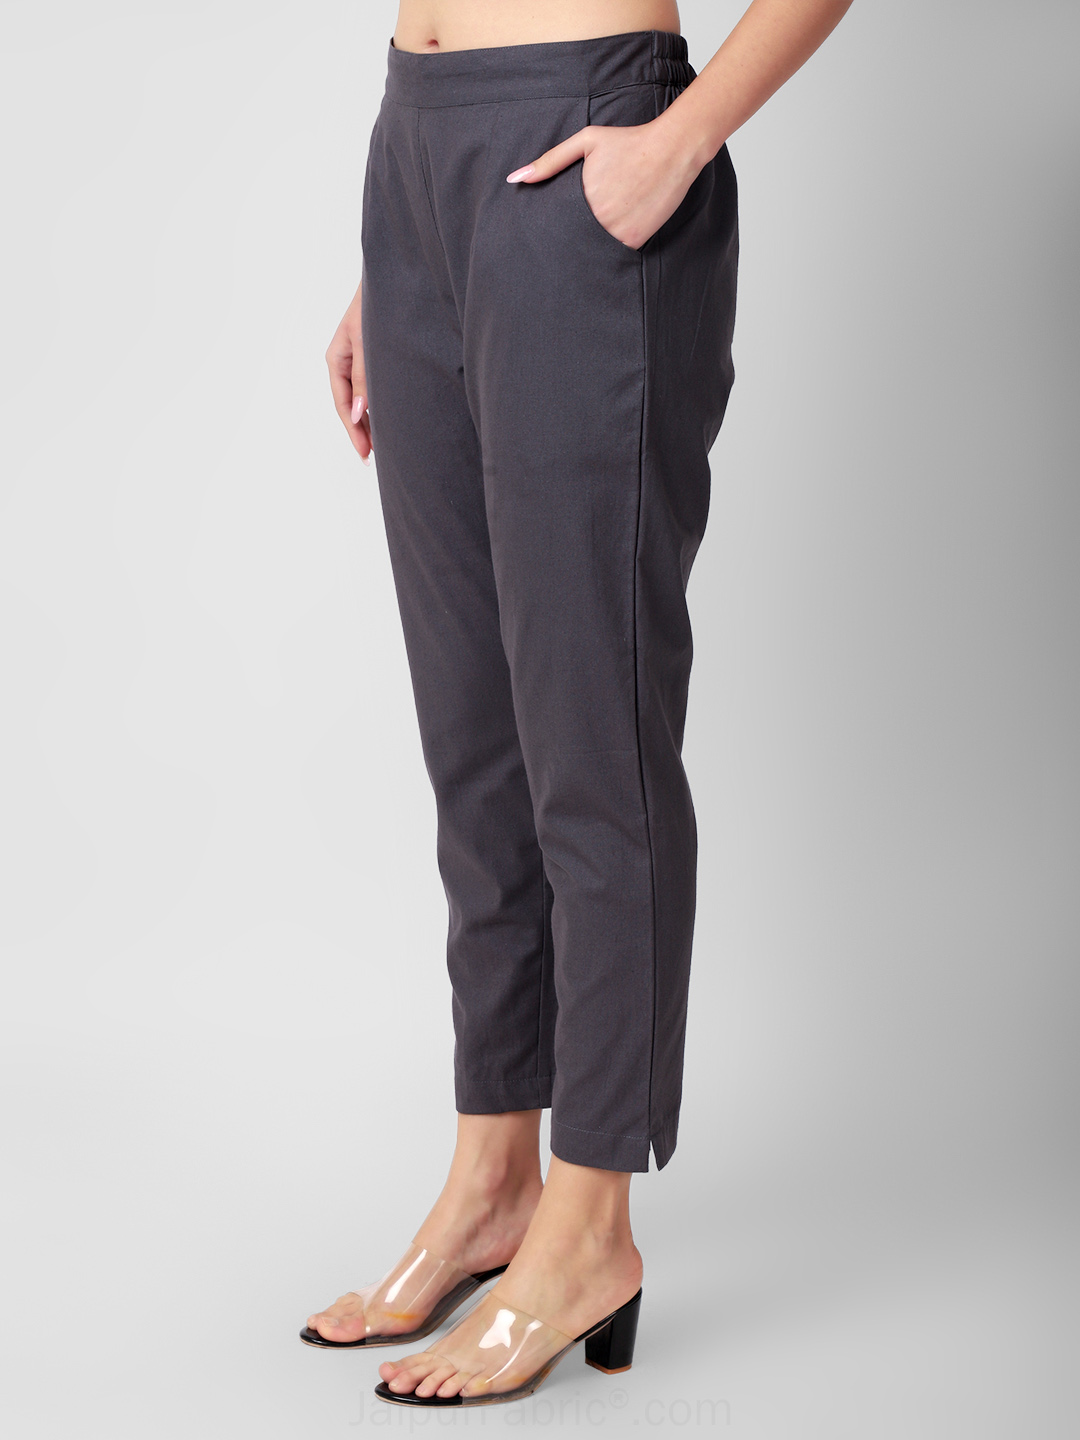 Slate Grey Women Cotton Pants casual and semi formal daily trousers